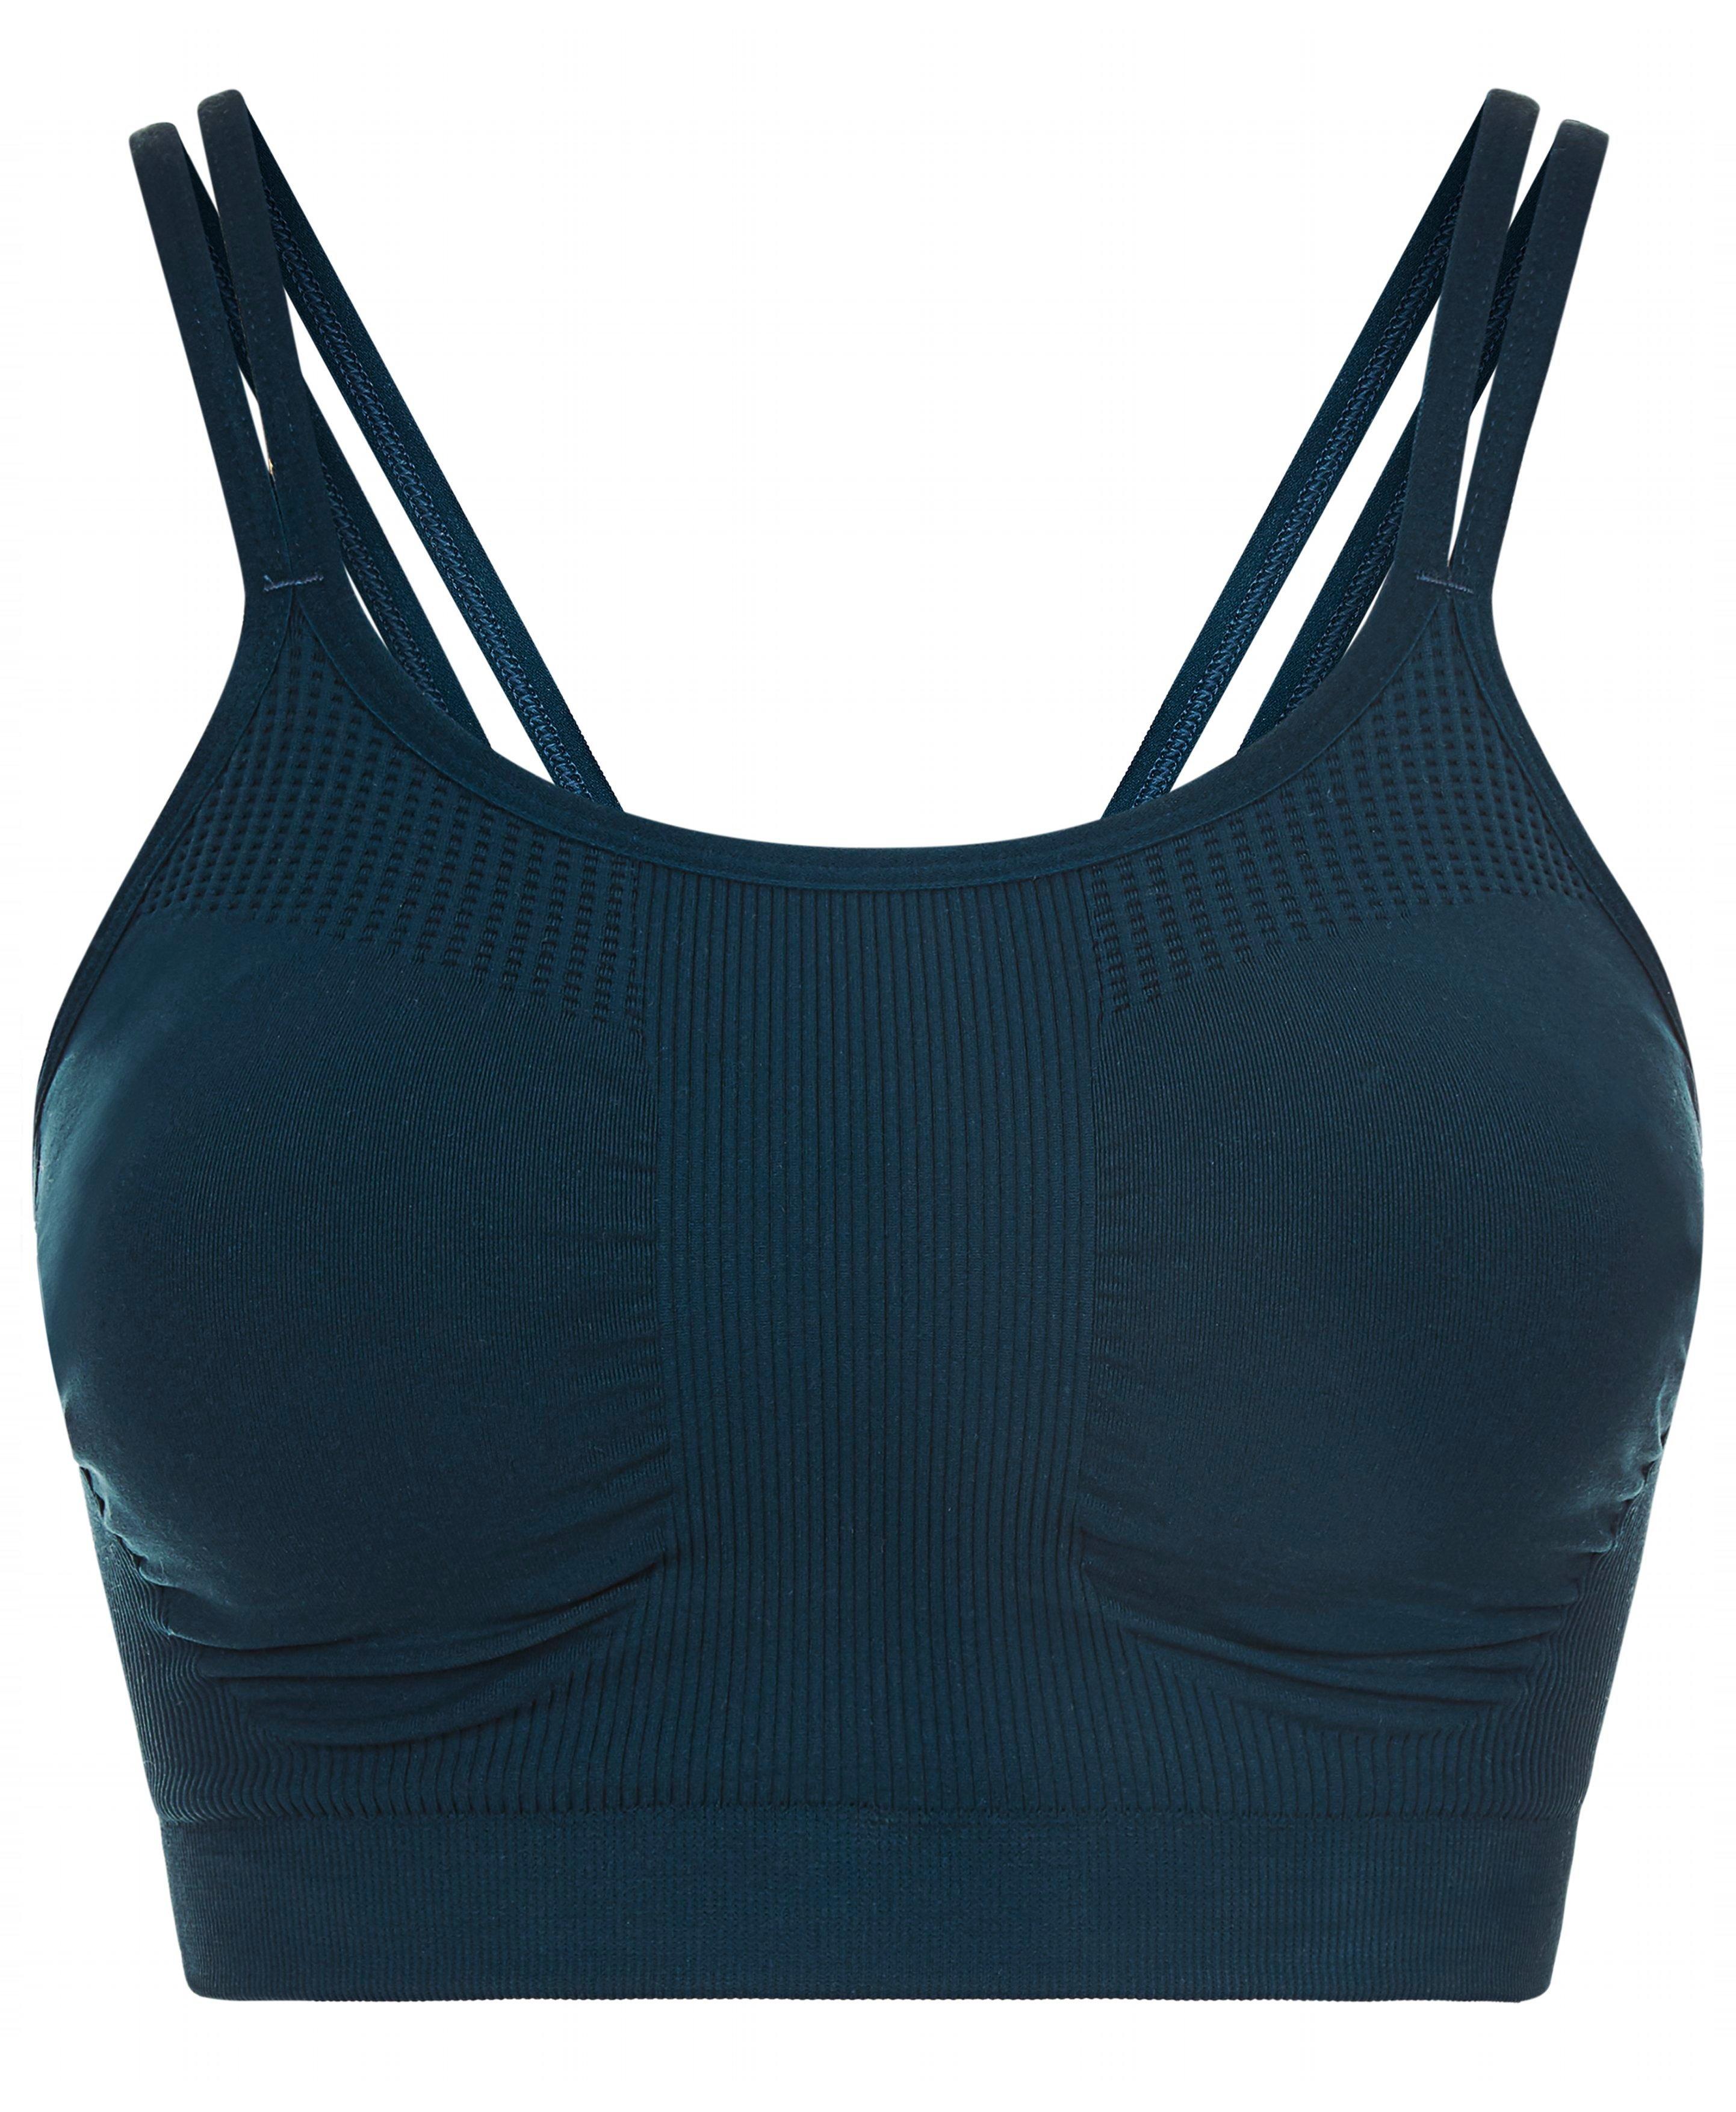 Soft, delicate and seriously pretty, this light support yoga bra is so comfortable, you may never want to take it off. The strappy, v-shaped back ensures this is the prettiest bra you own.